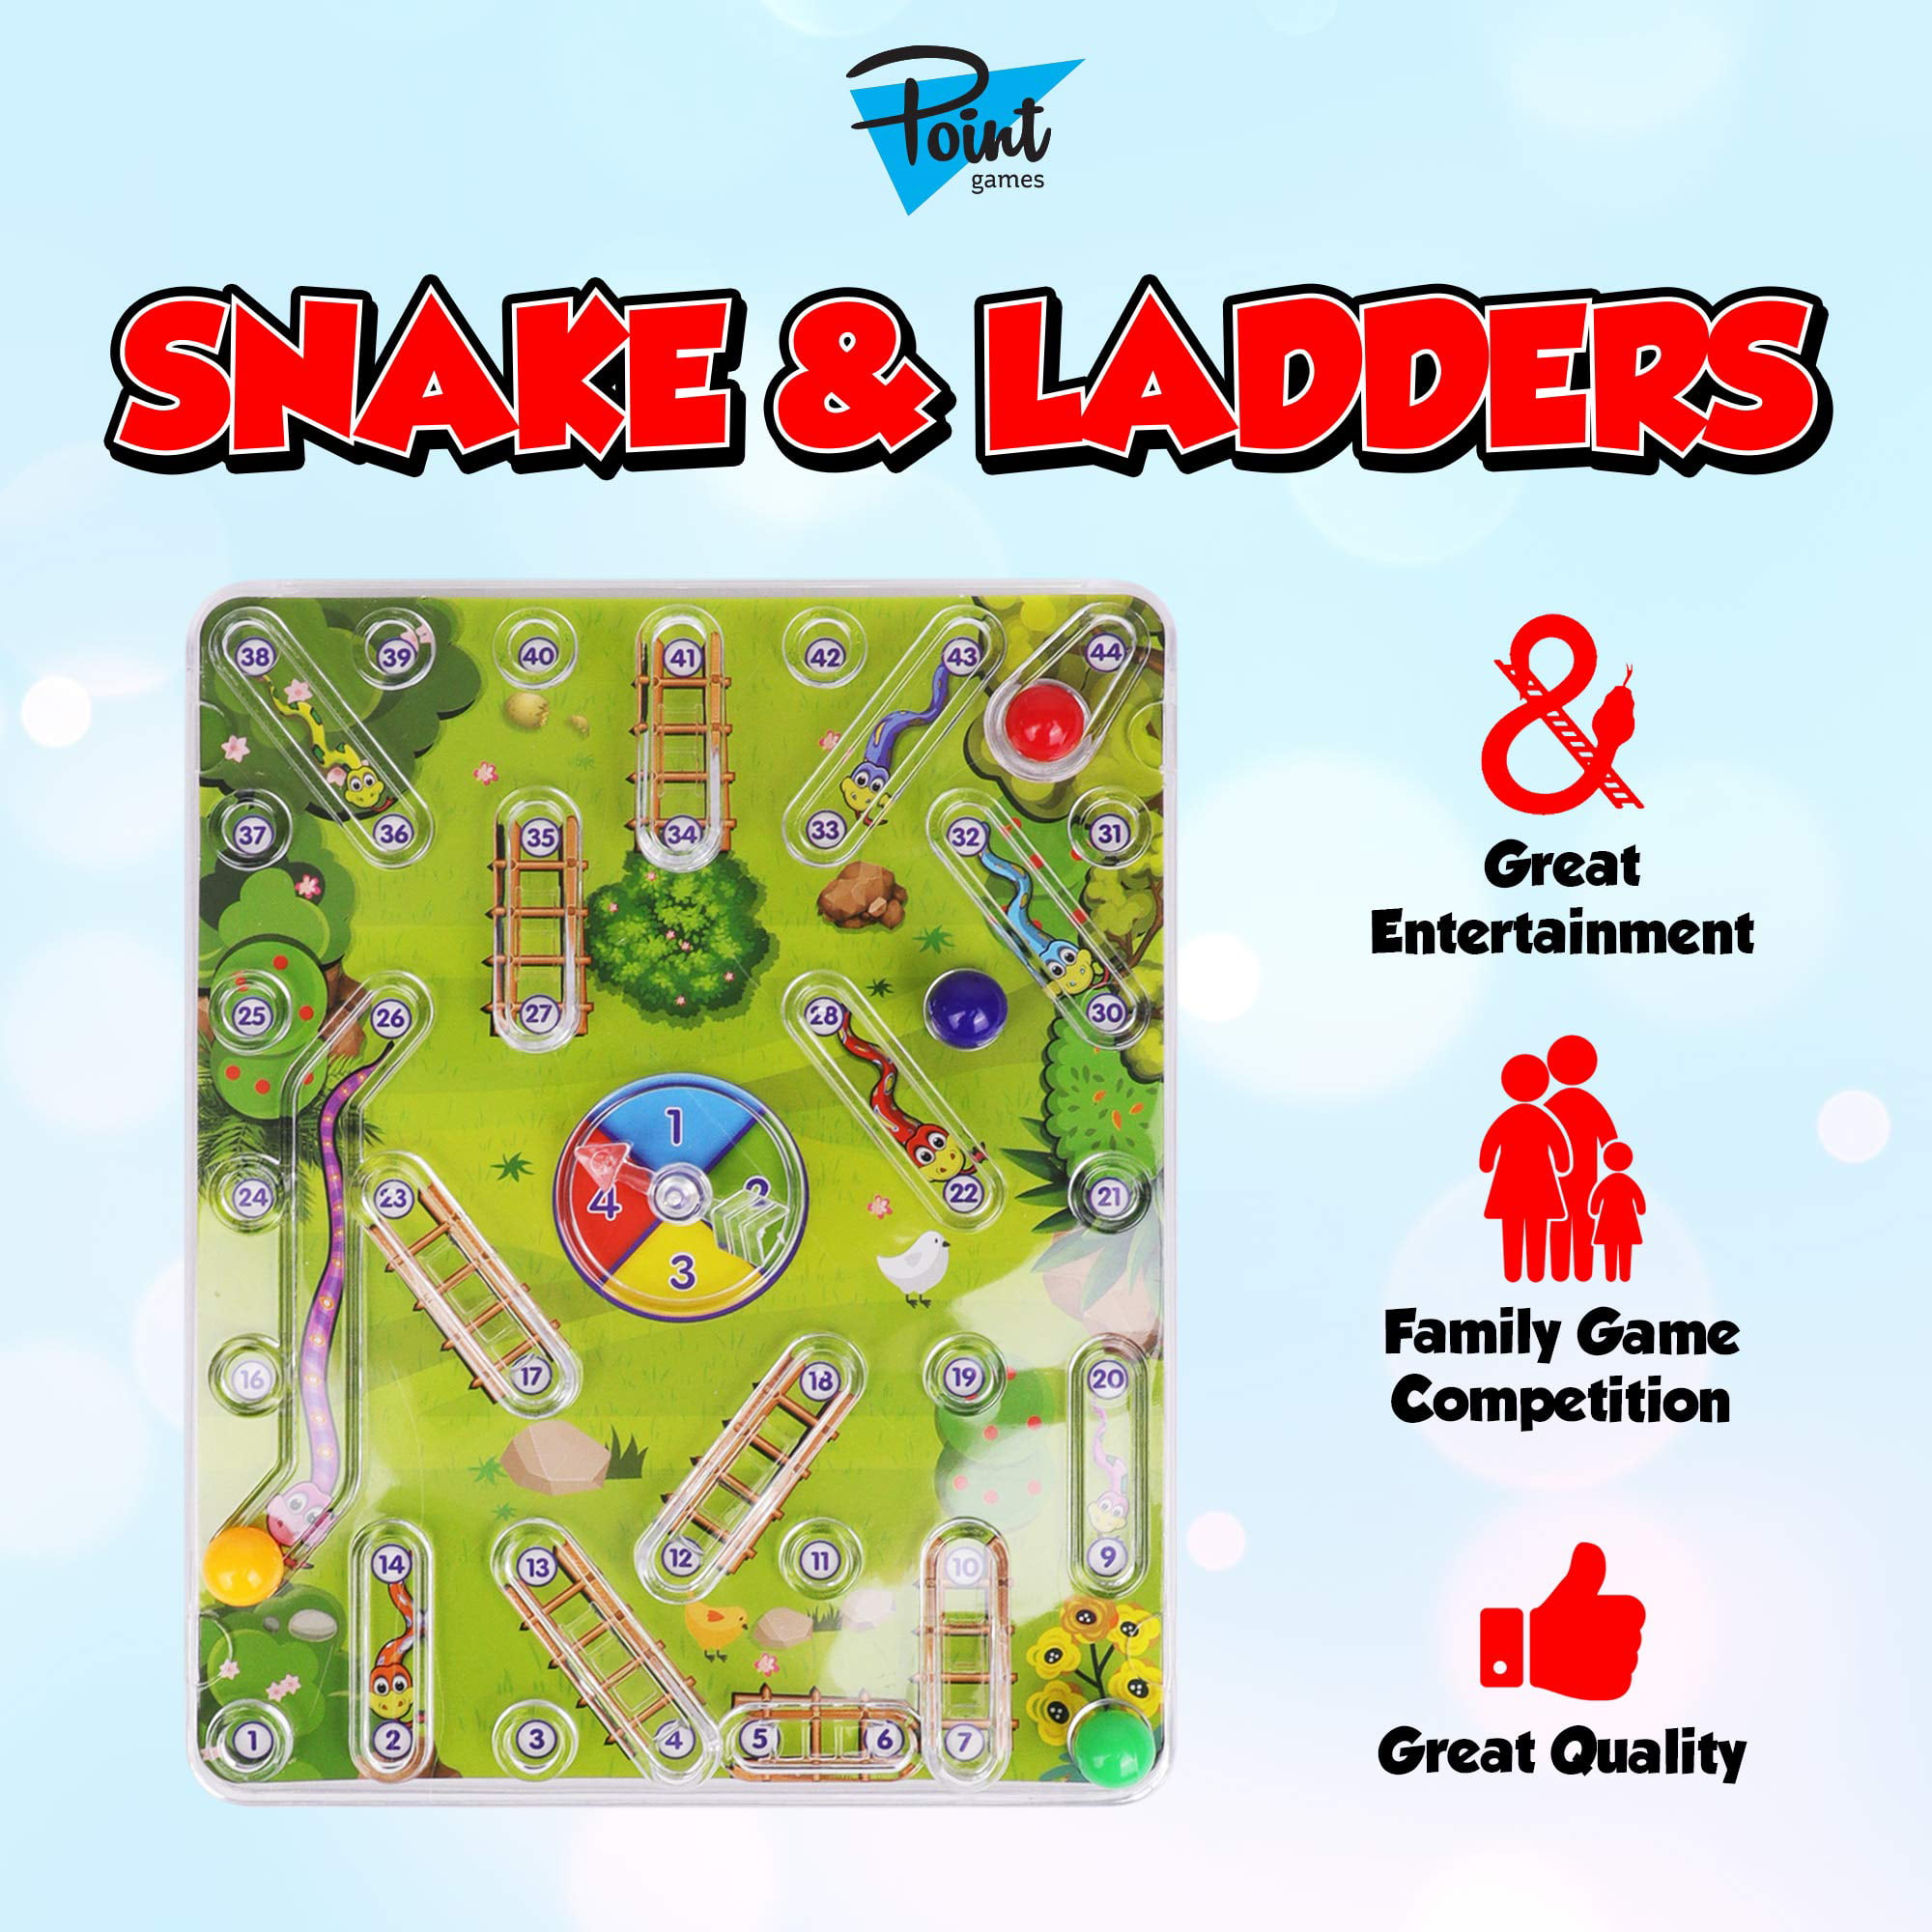 Game Review: Snakesss – Gaming With Sidekicks